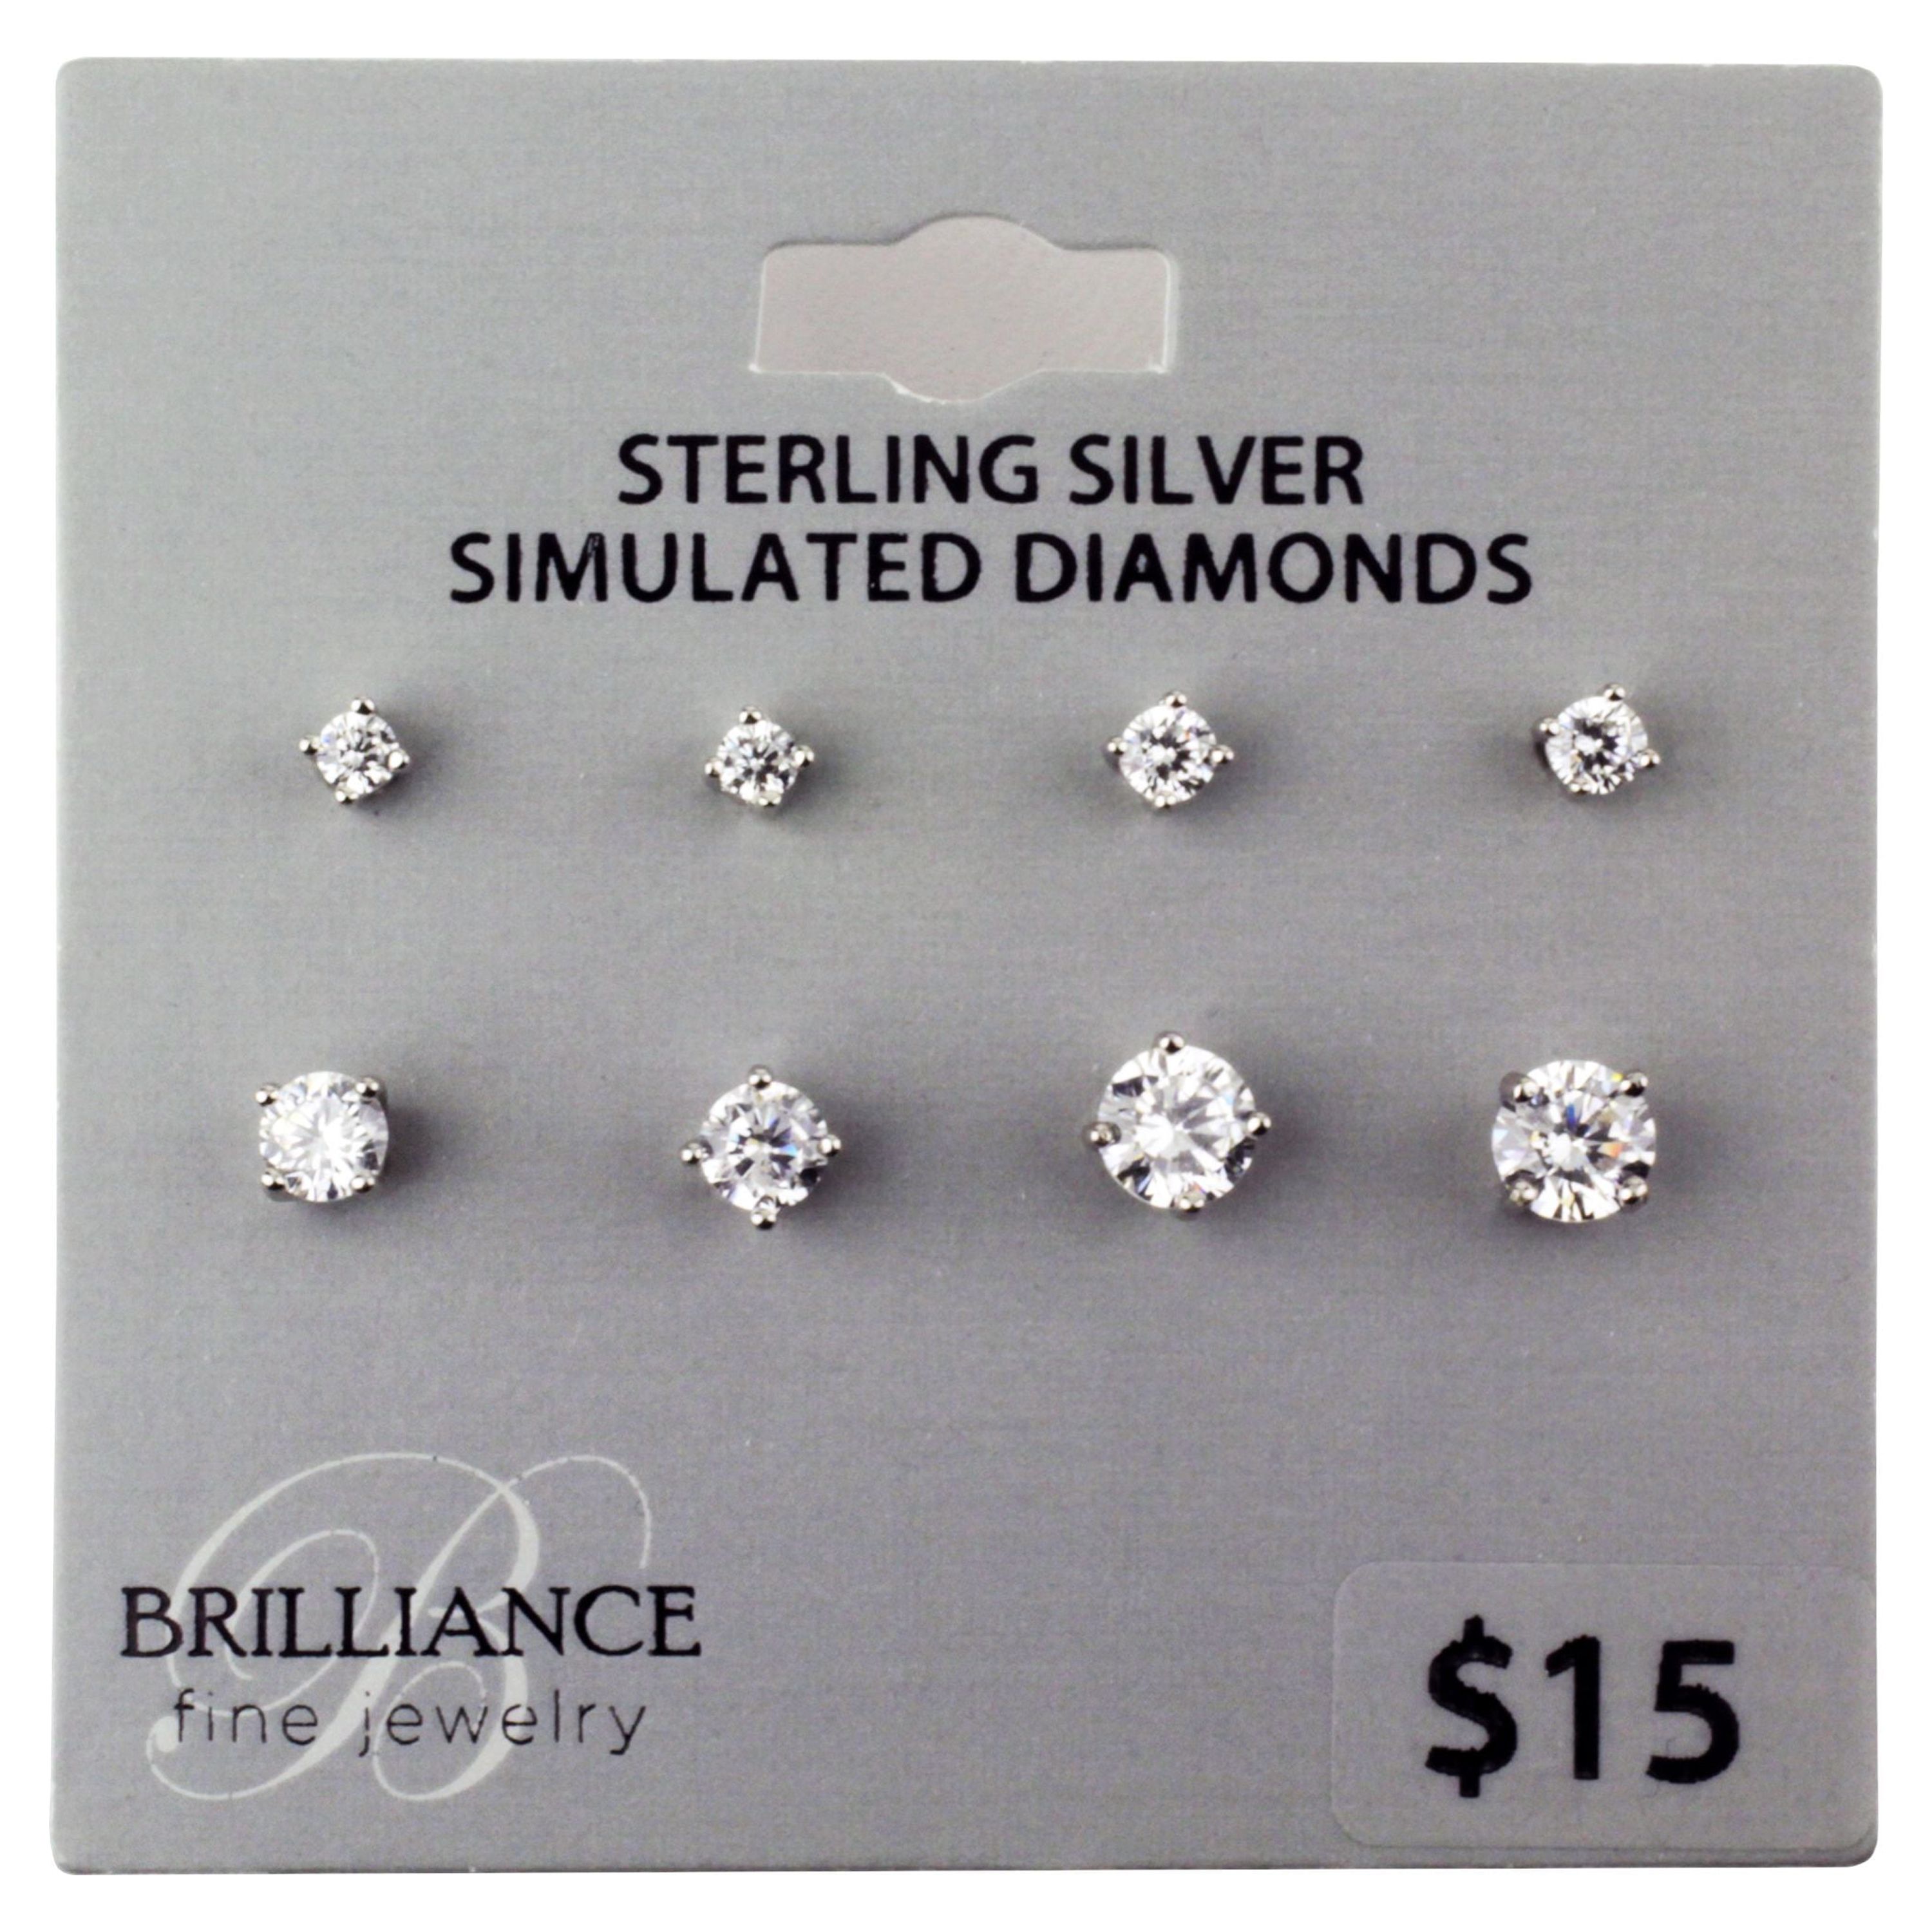 Brilliance Fine Jewelry Women's Simulated Diamond 4 Pair Round Earrings in Sterling Silver - image 2 of 3